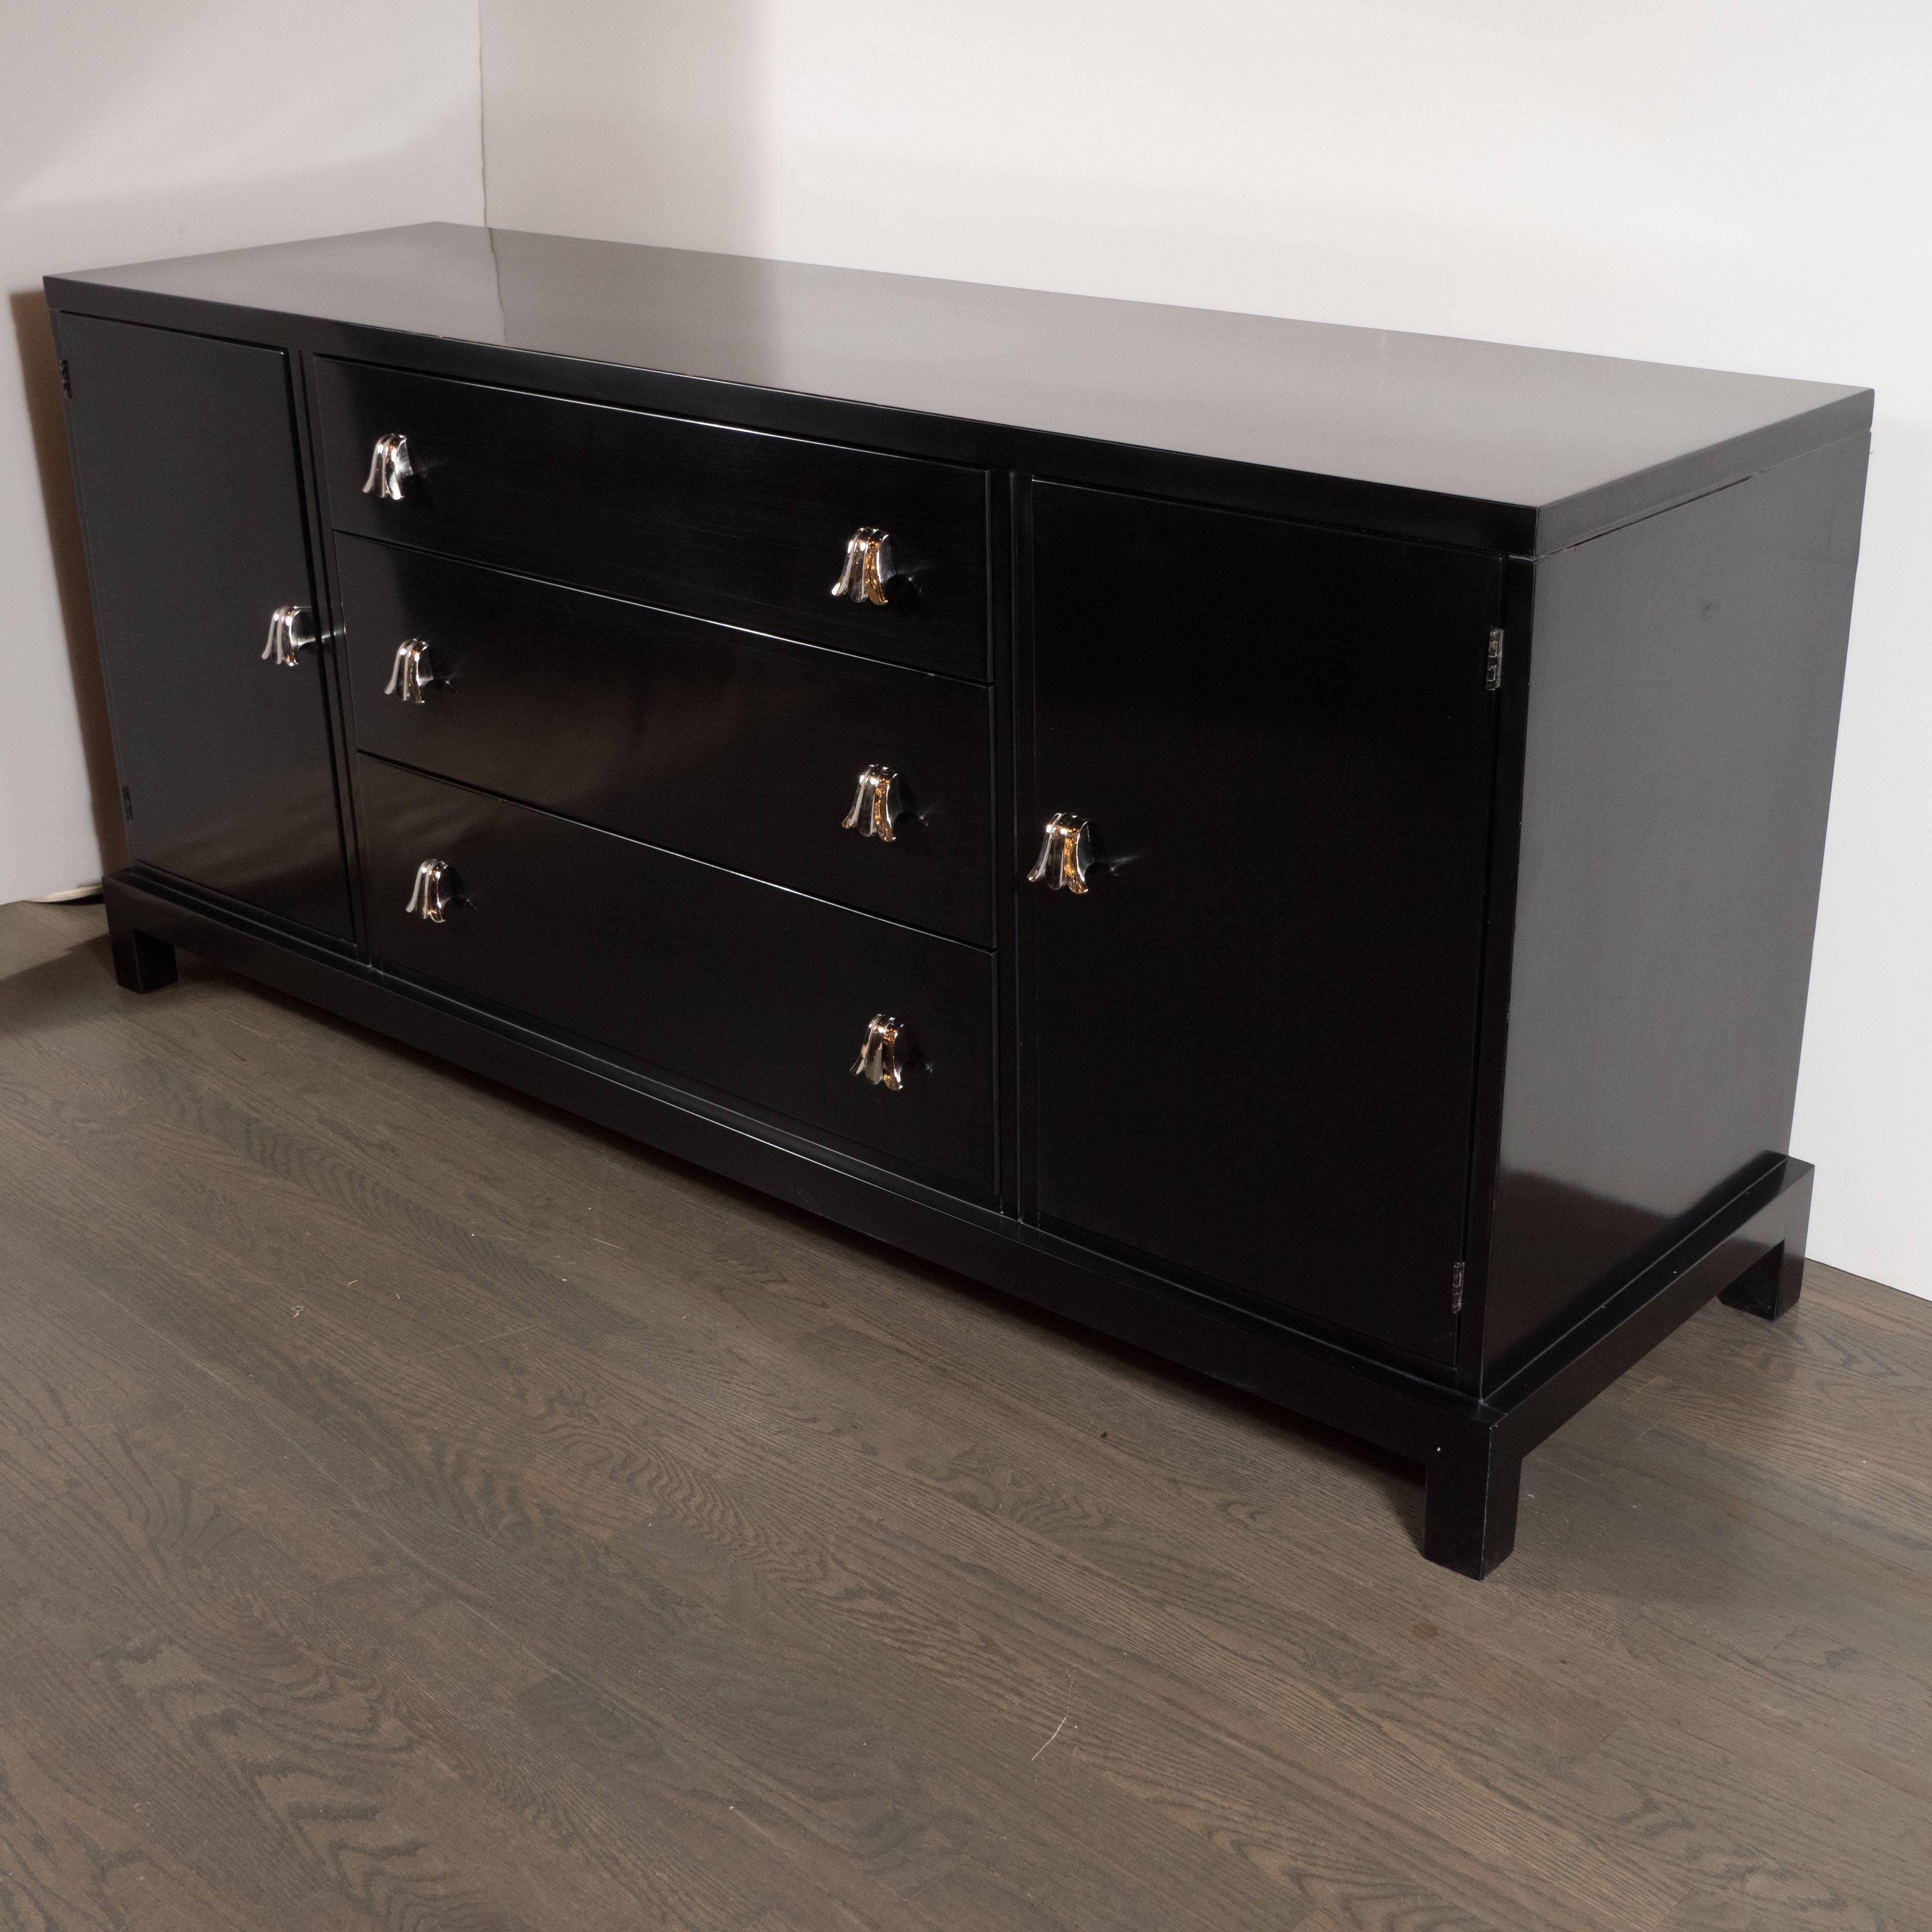 This elegant skyscraper style sideboard or credenza was fabricated circa 1945 by the esteemed American maker Grosfeld House. It features an ebonized walnut body; square legs; and nickel stylized tulip pulls. There are three spacious drawers in the